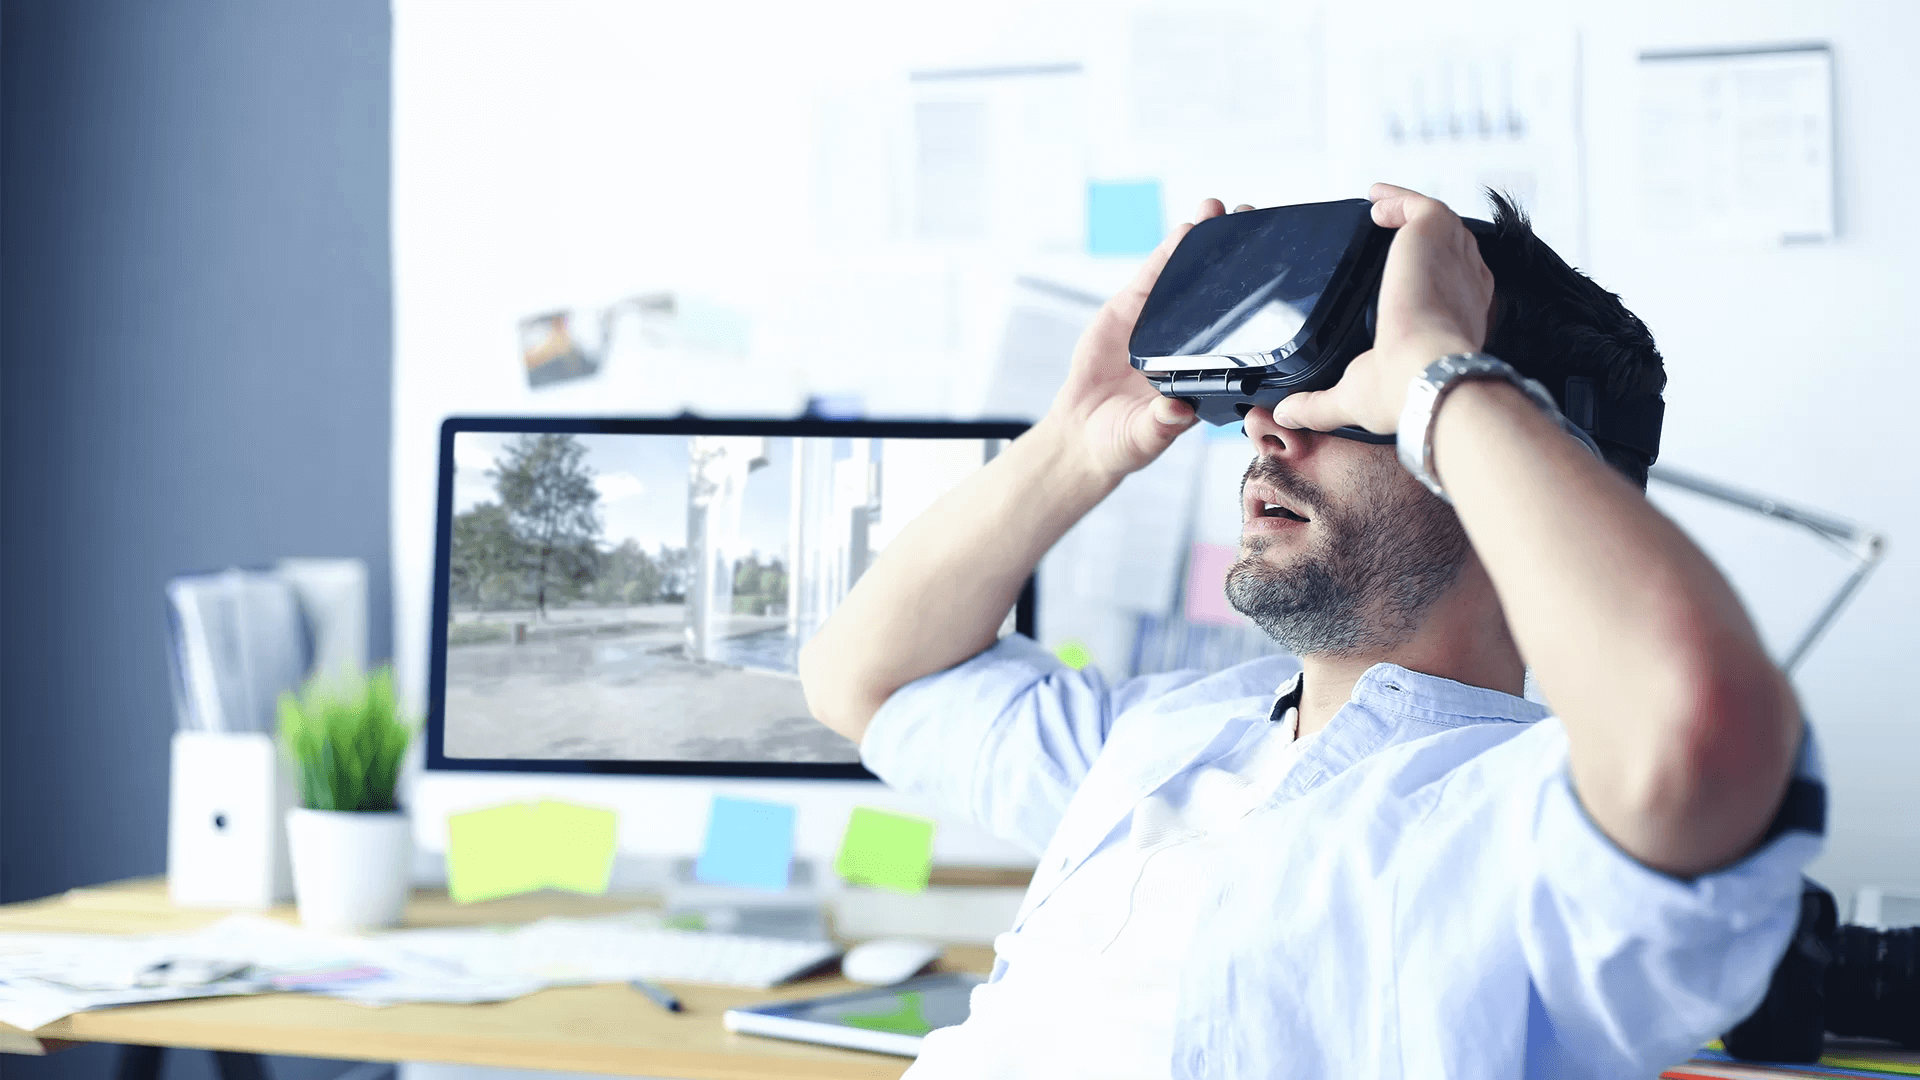 An Architect Using a VR Headset